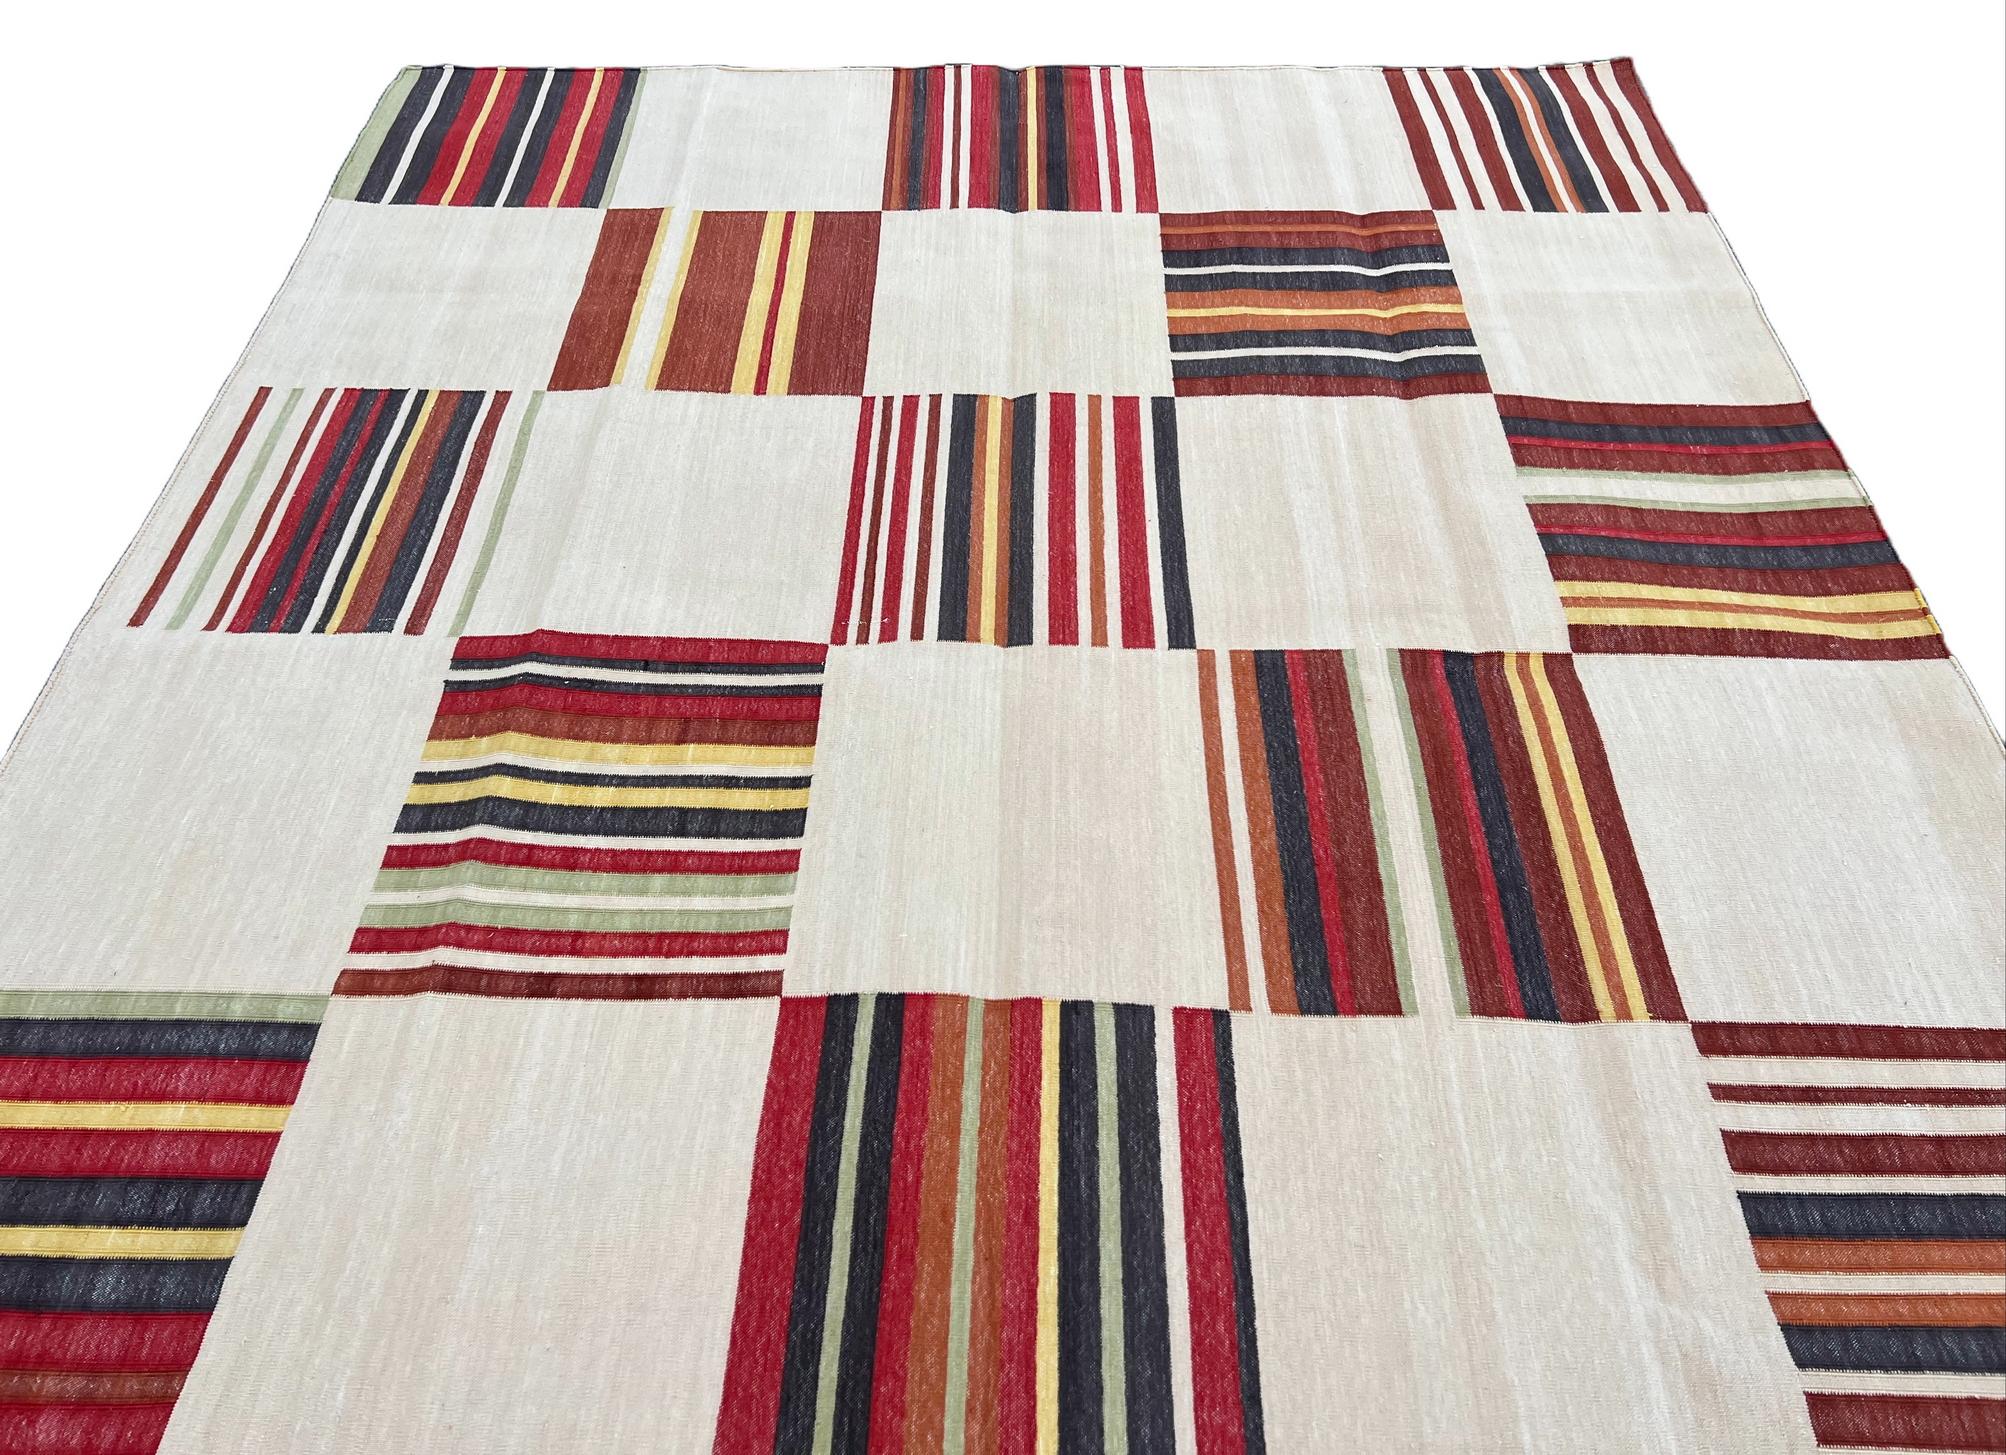 Handmade Cotton Area Flat Weave Rug, 6x8 Beige And Red Striped Indian Dhurrie In New Condition For Sale In Jaipur, IN